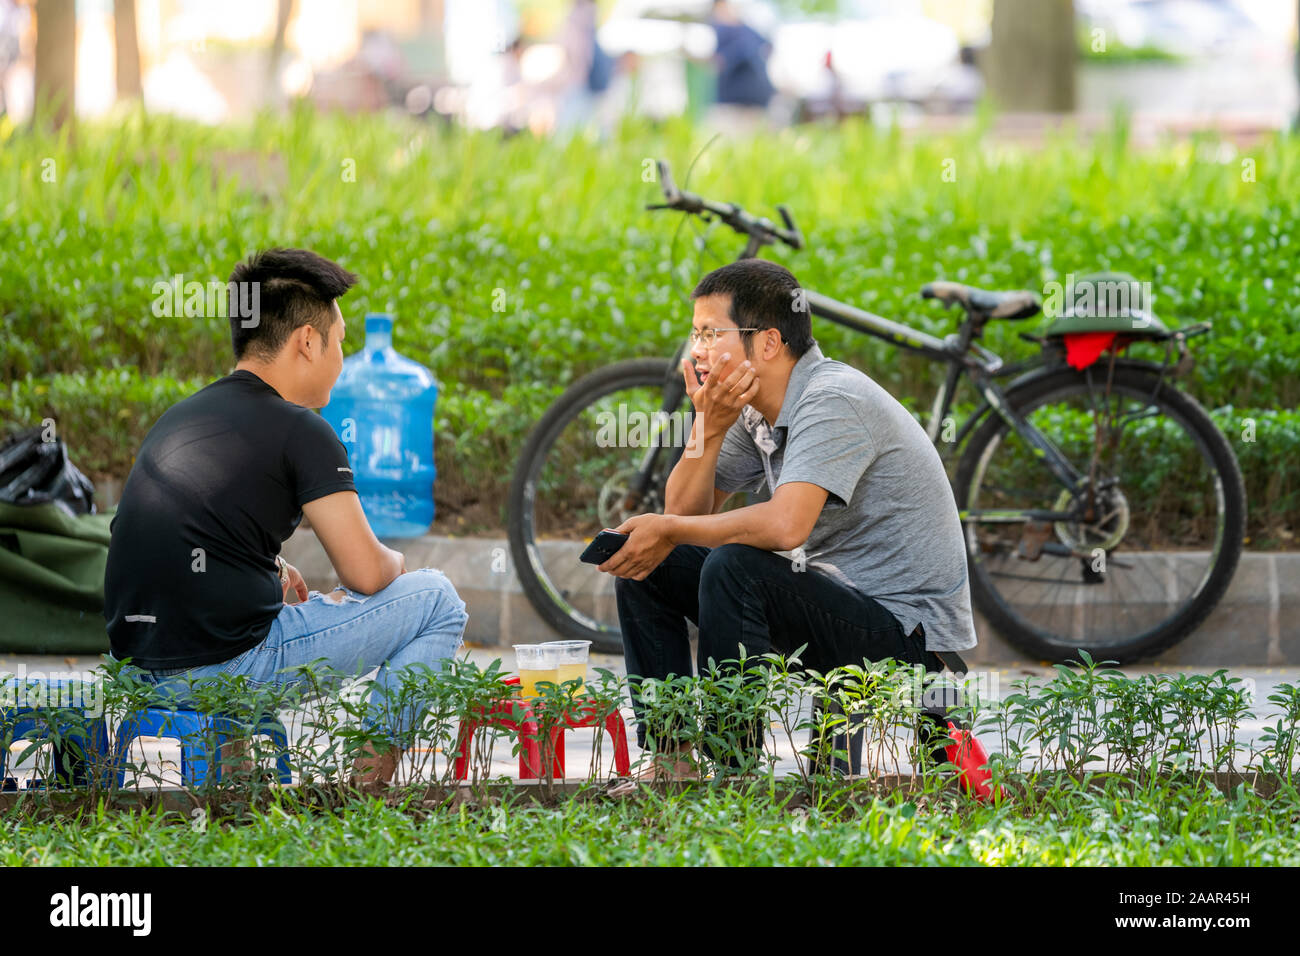 Hanoi, Vietnam - 12th October 2019: Two young asian men sit down in a park on plastic stools drinking juice and talking about their day Stock Photo